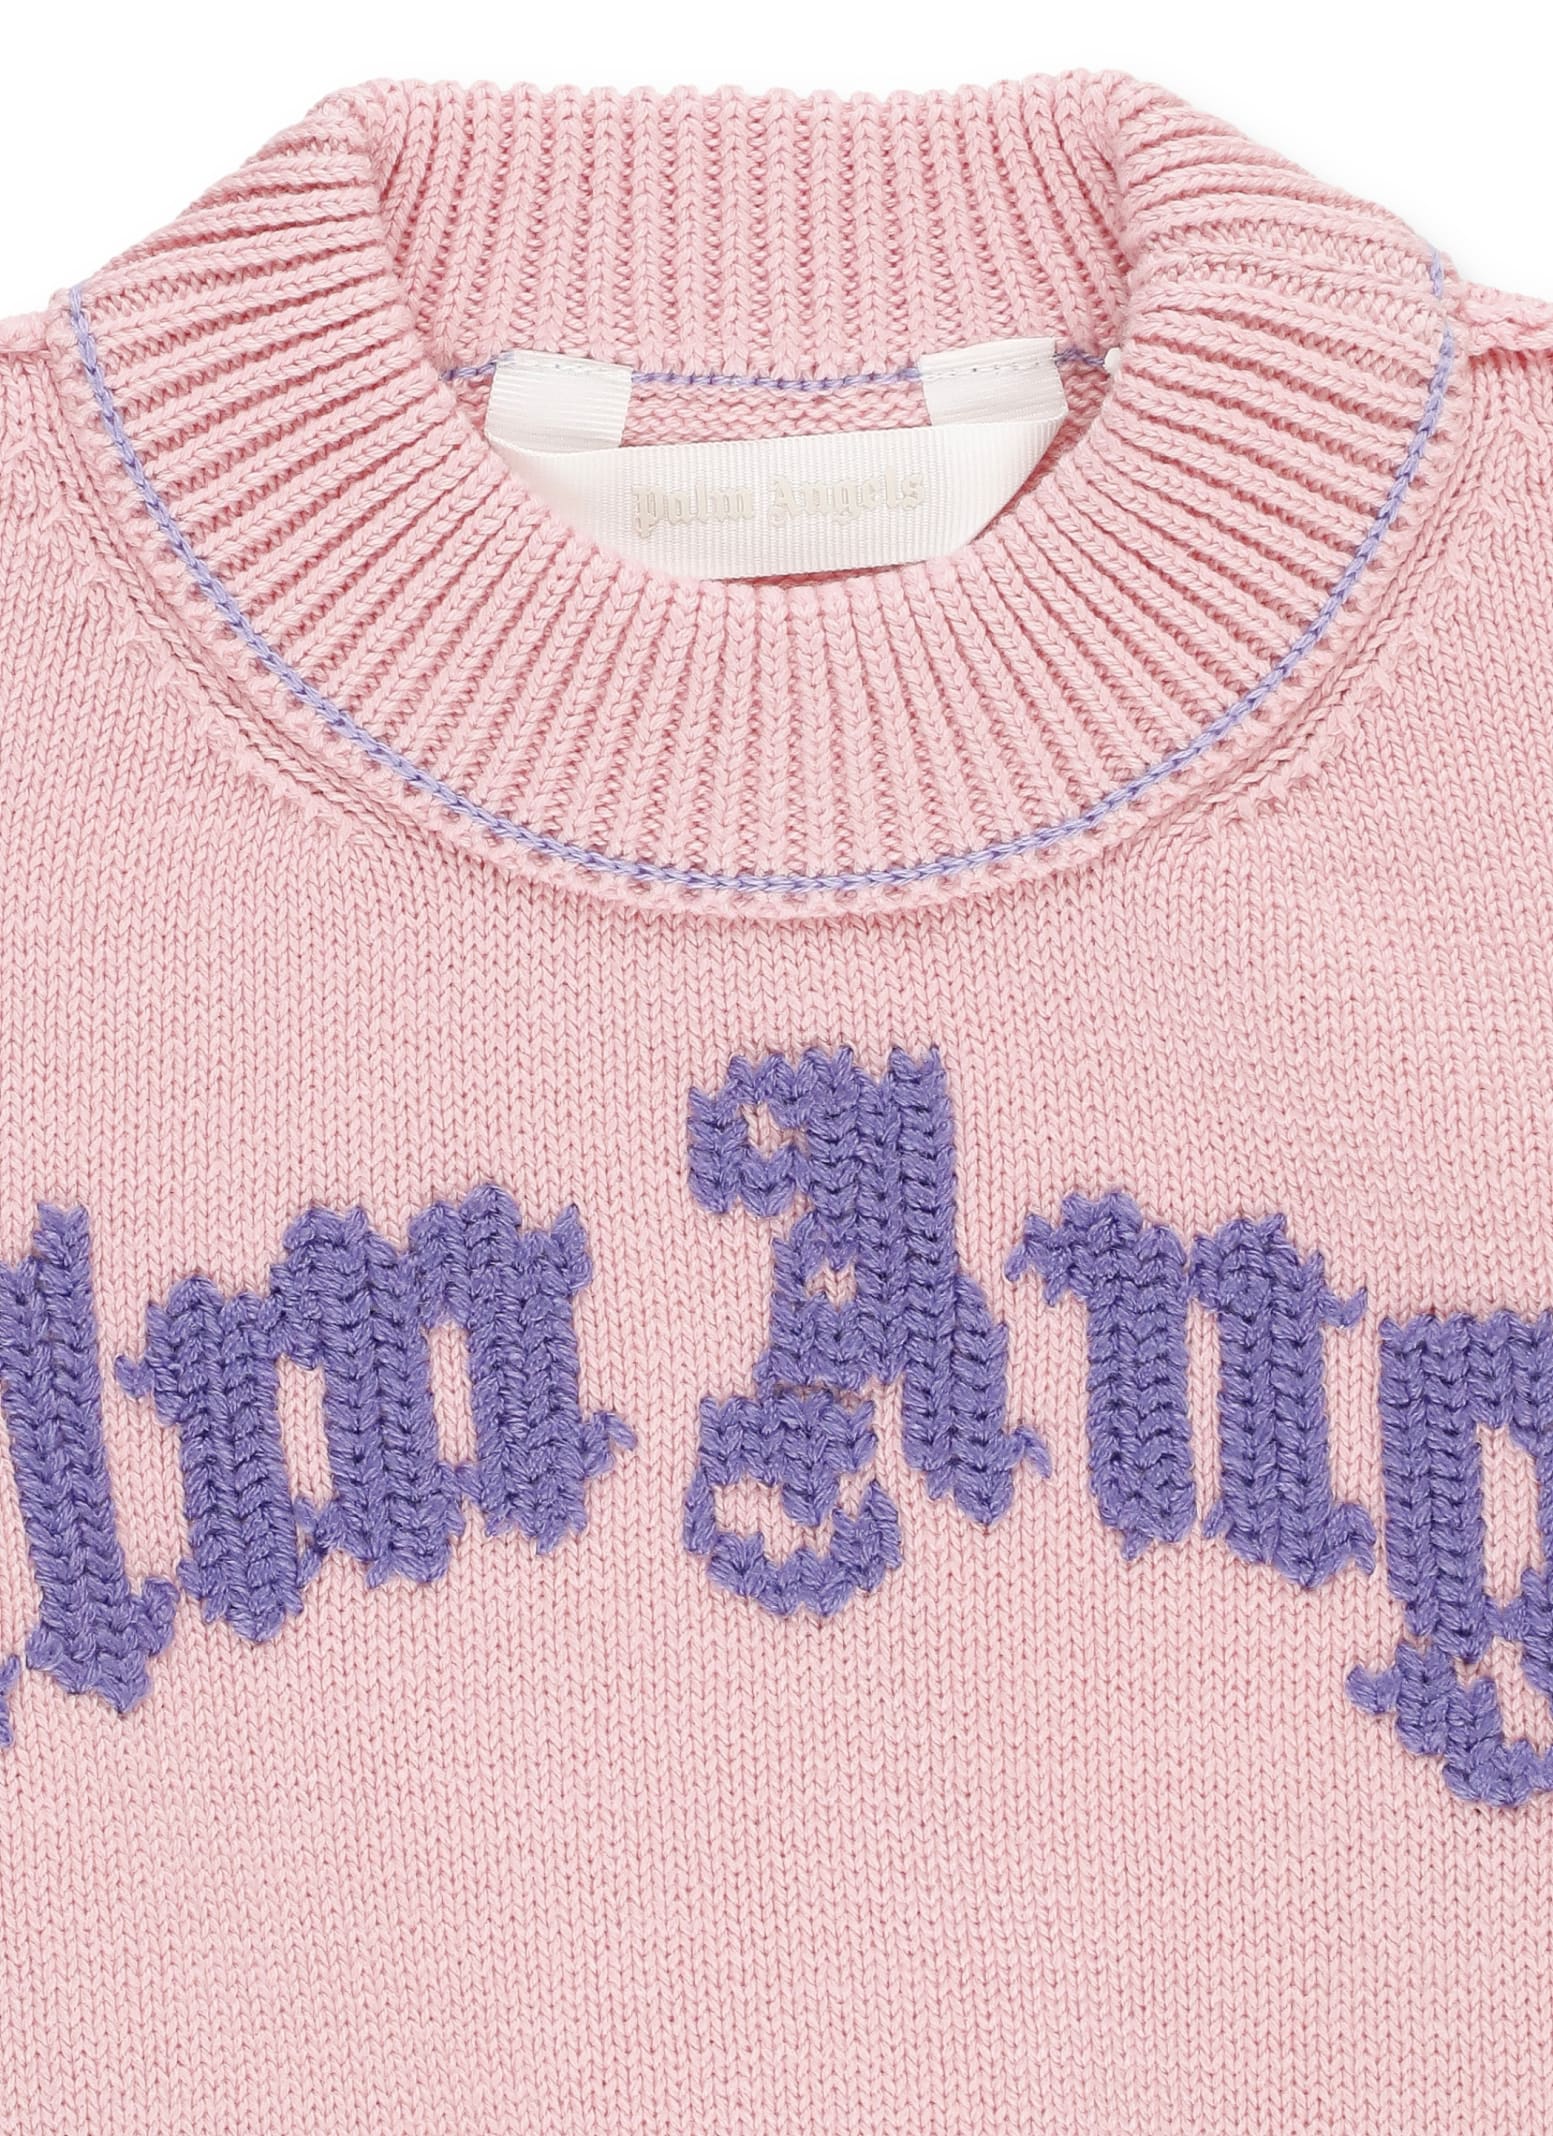 Shop Palm Angels Jumper With Logo In Pink